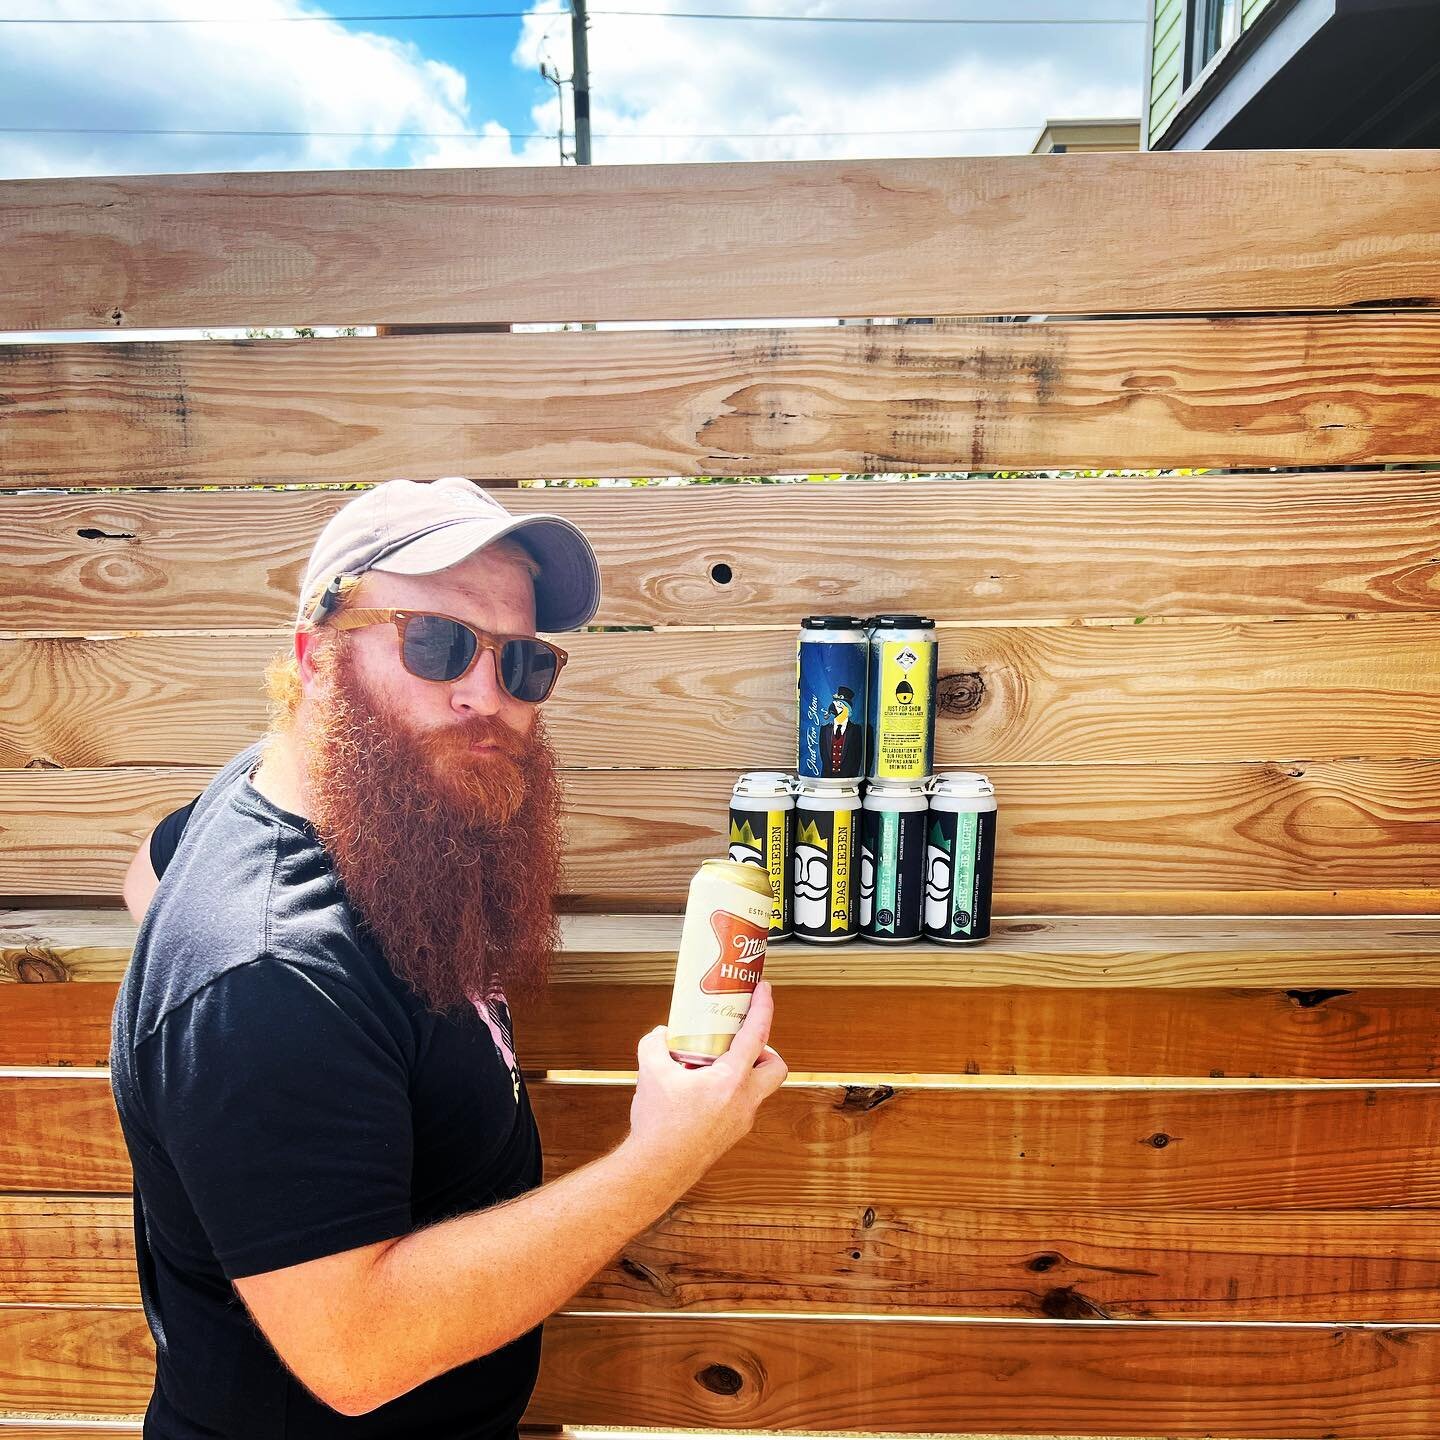 Kyle says it&rsquo;s time to live that Crispy Life! Whether it&rsquo;s @millerhighlife or freshly tapped @corporateladderbrewing Just For Show Czech Pils collab with @trippinganimalsbrewing or @magnanimousbrewing Das Sieben Light Lager we got the bee